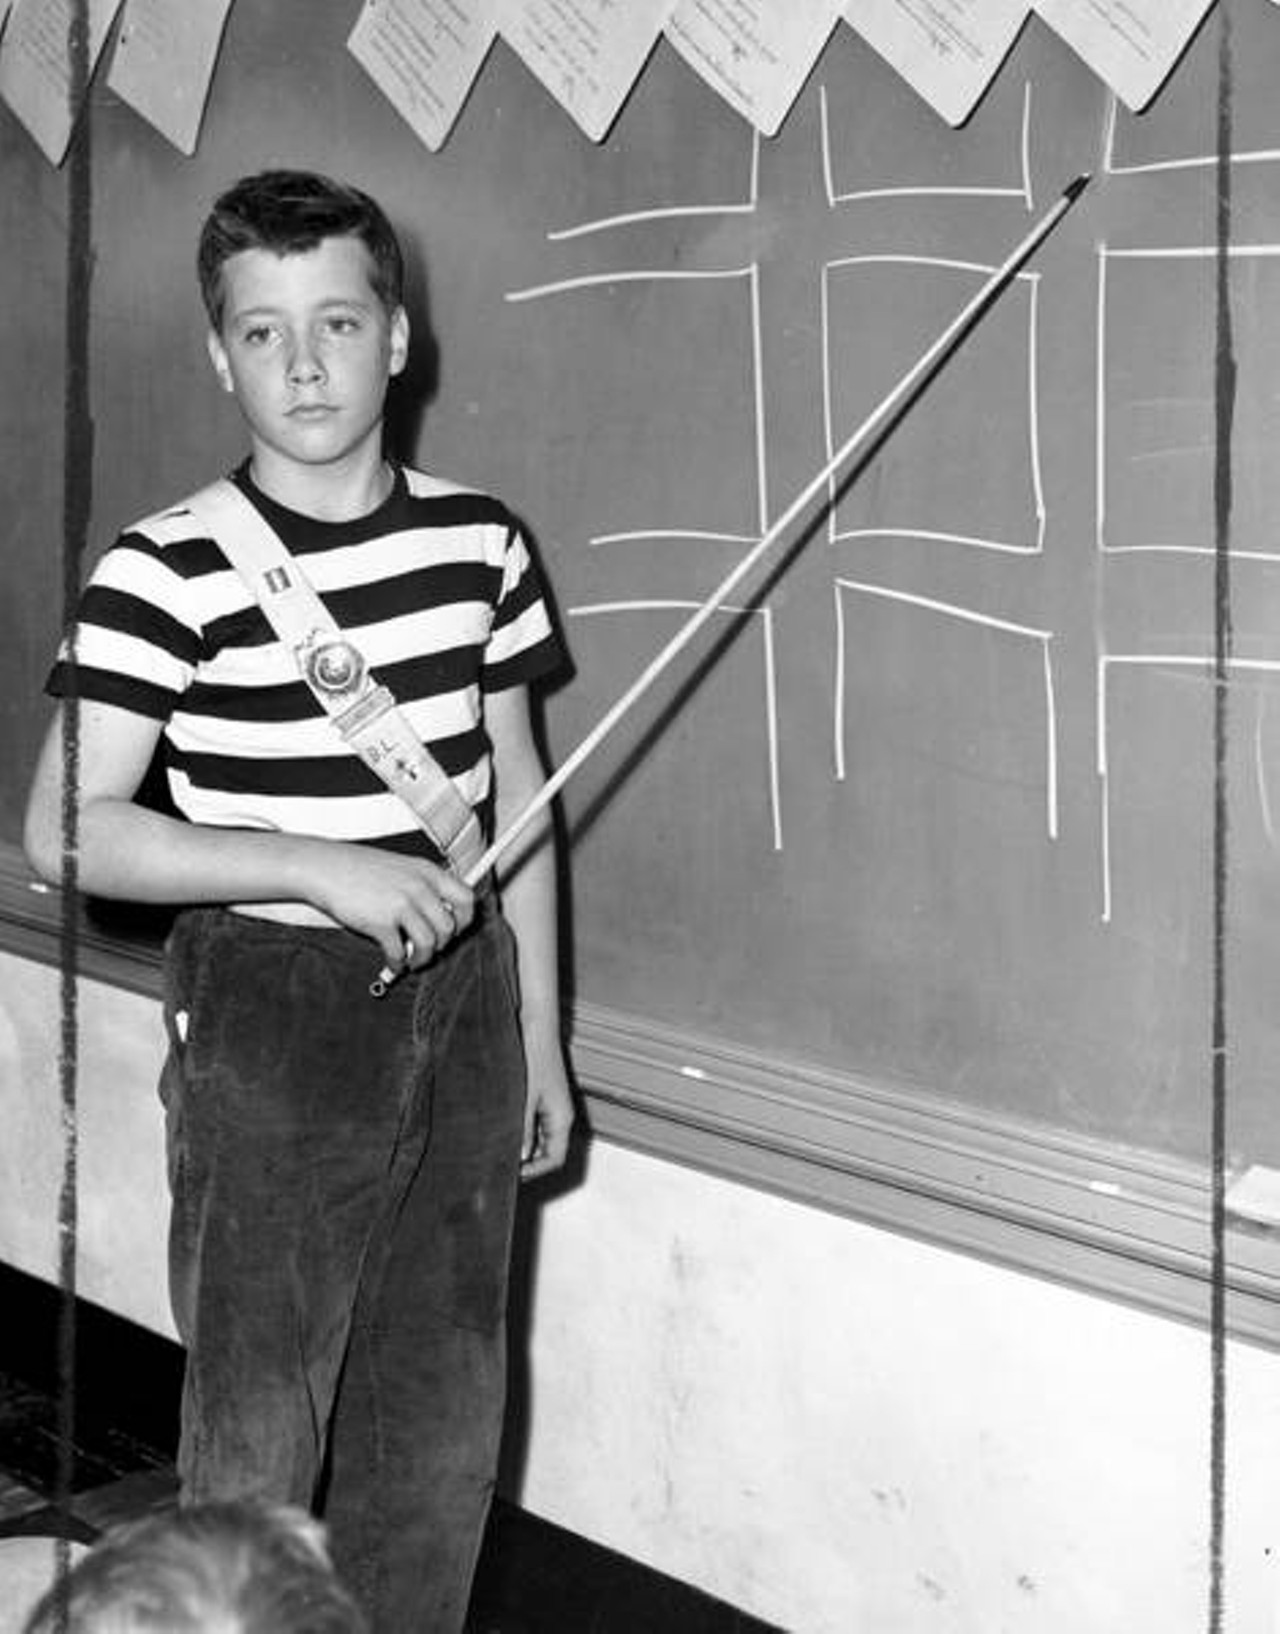 Bill Louy stands at a chalkboard at the Church of St. Dominic School in Shaker Heights., 1942